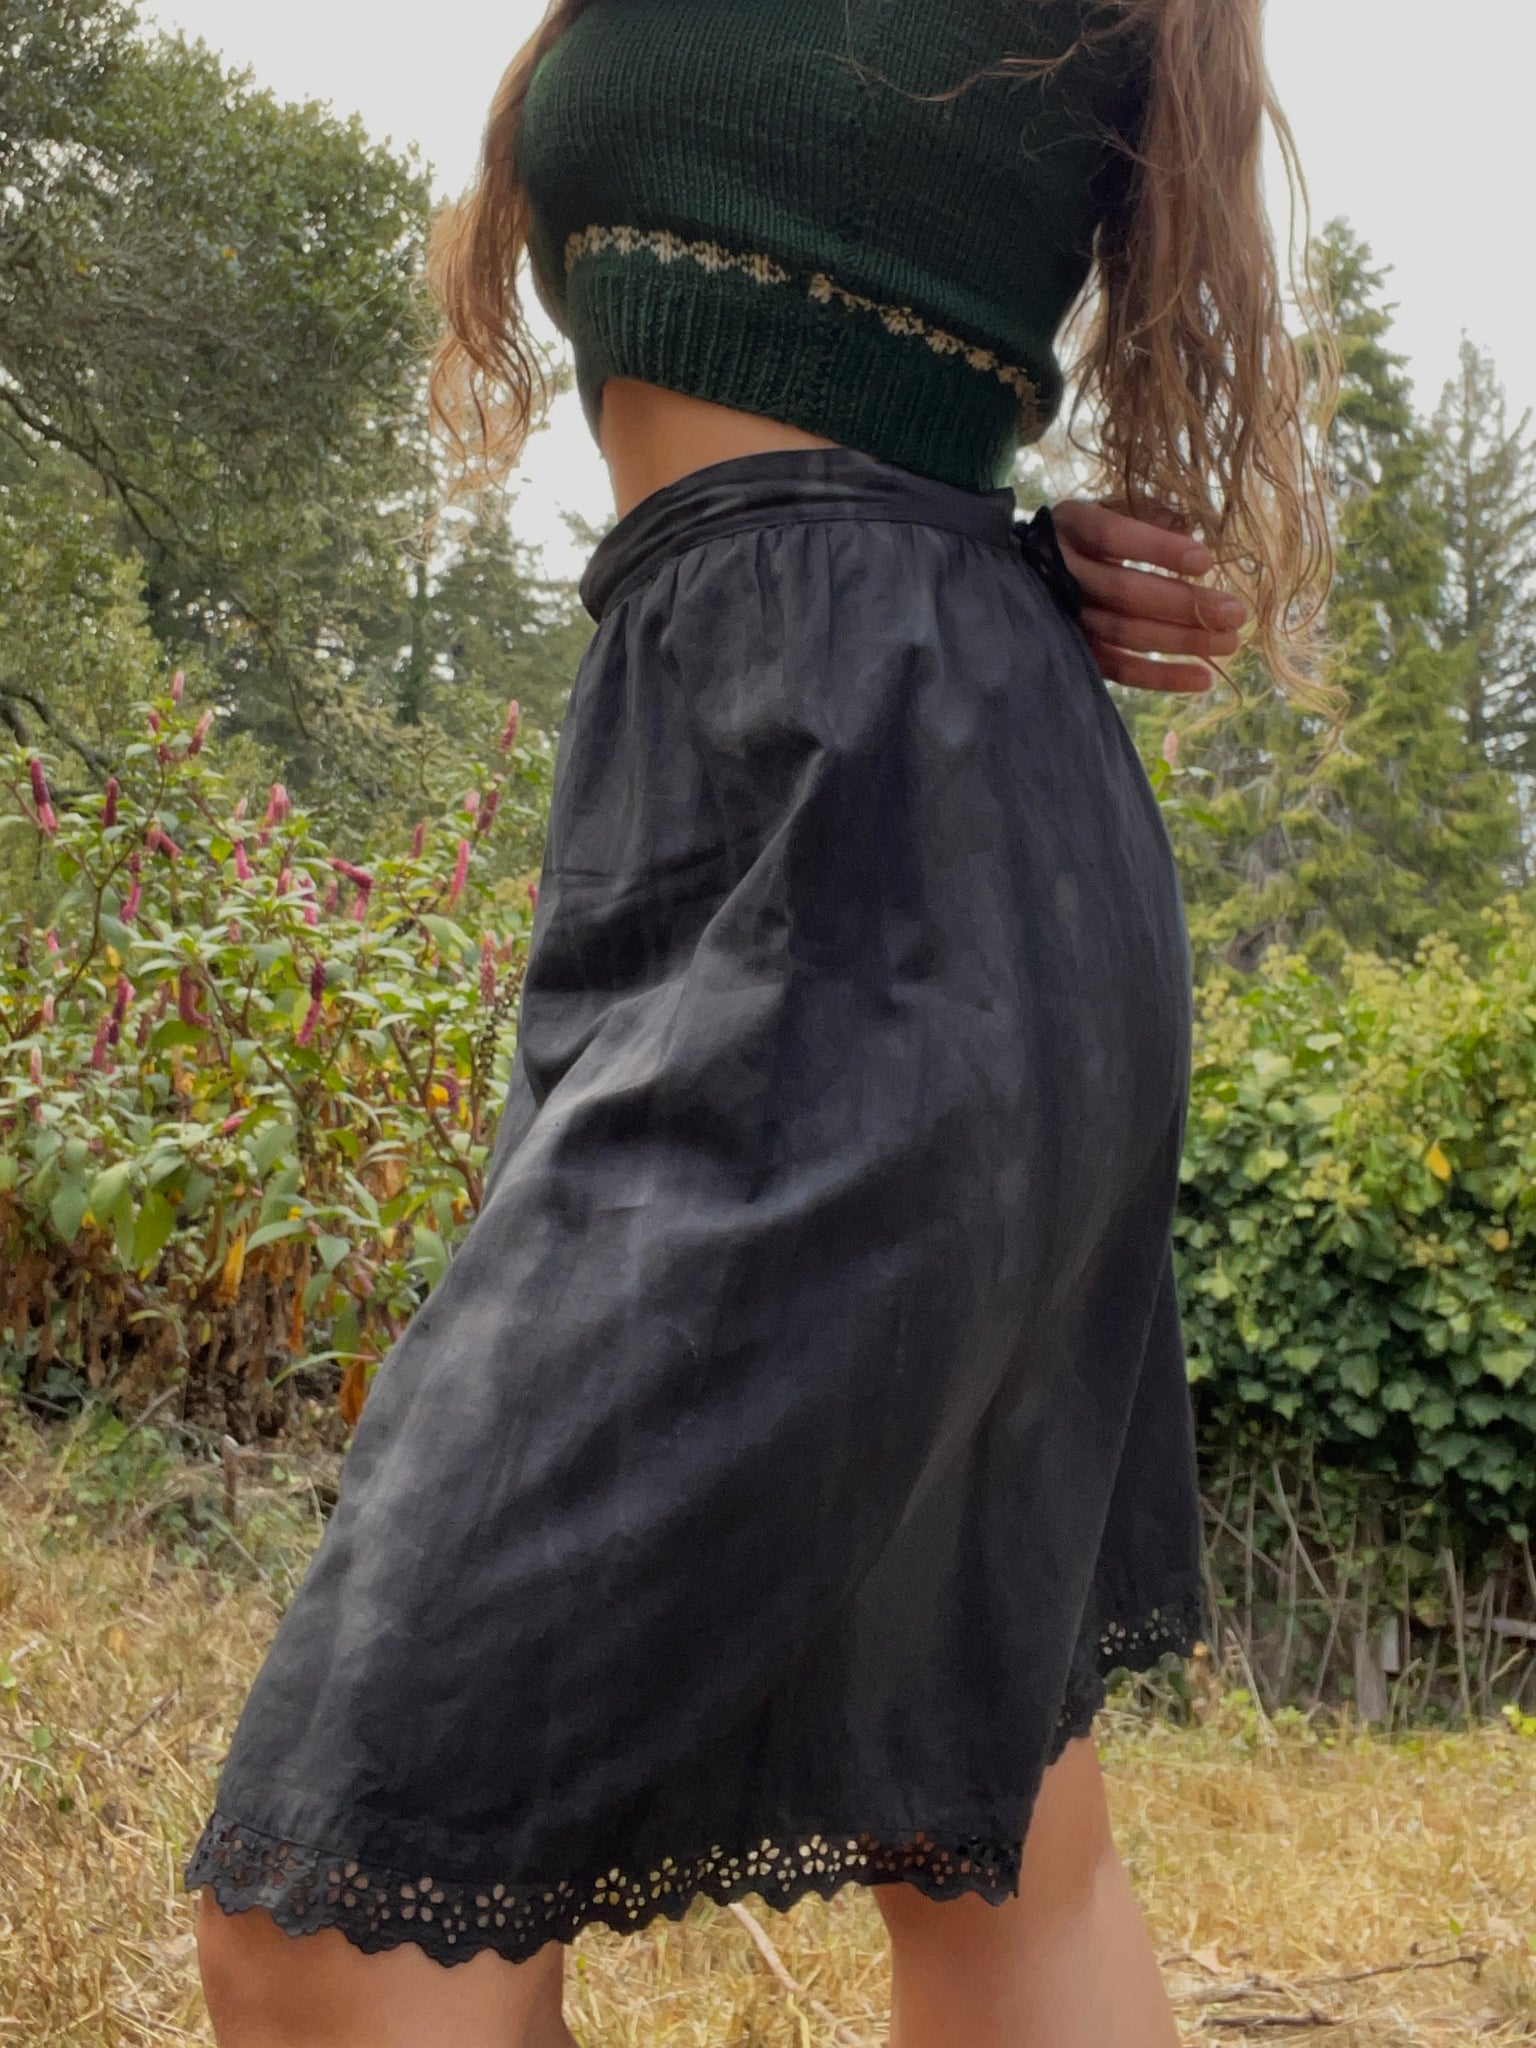 Antique Fade Black Cotton Eyelet Bloomers